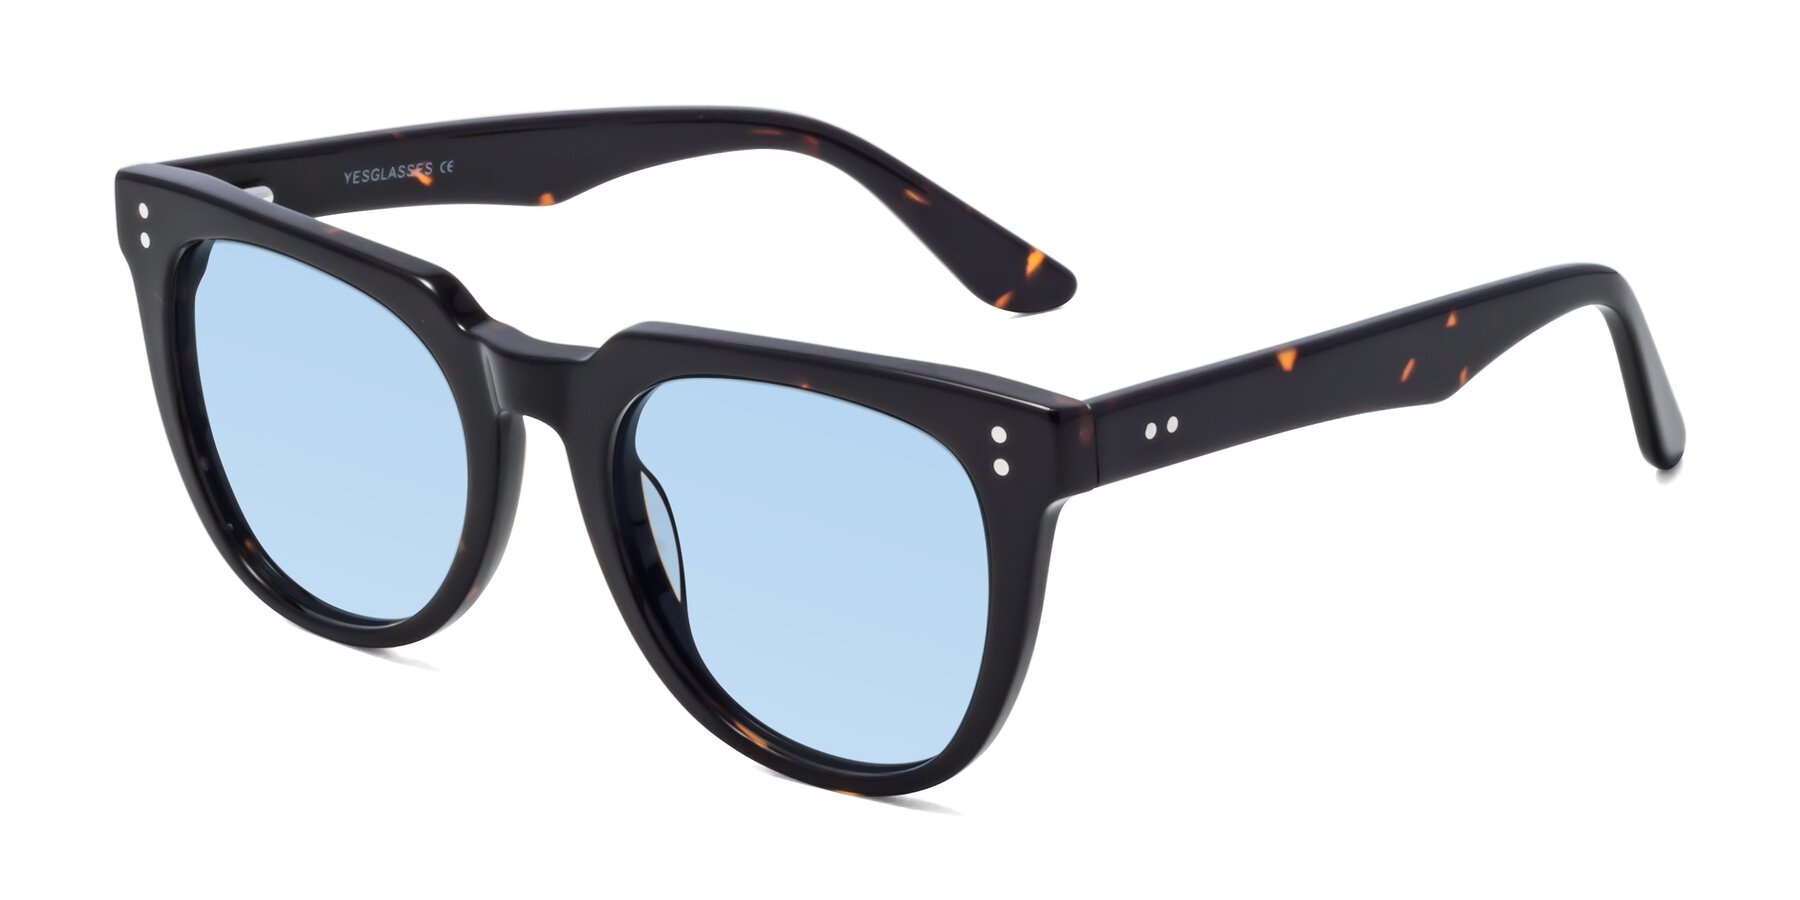 Angle of Graceful in Tortoise with Light Blue Tinted Lenses